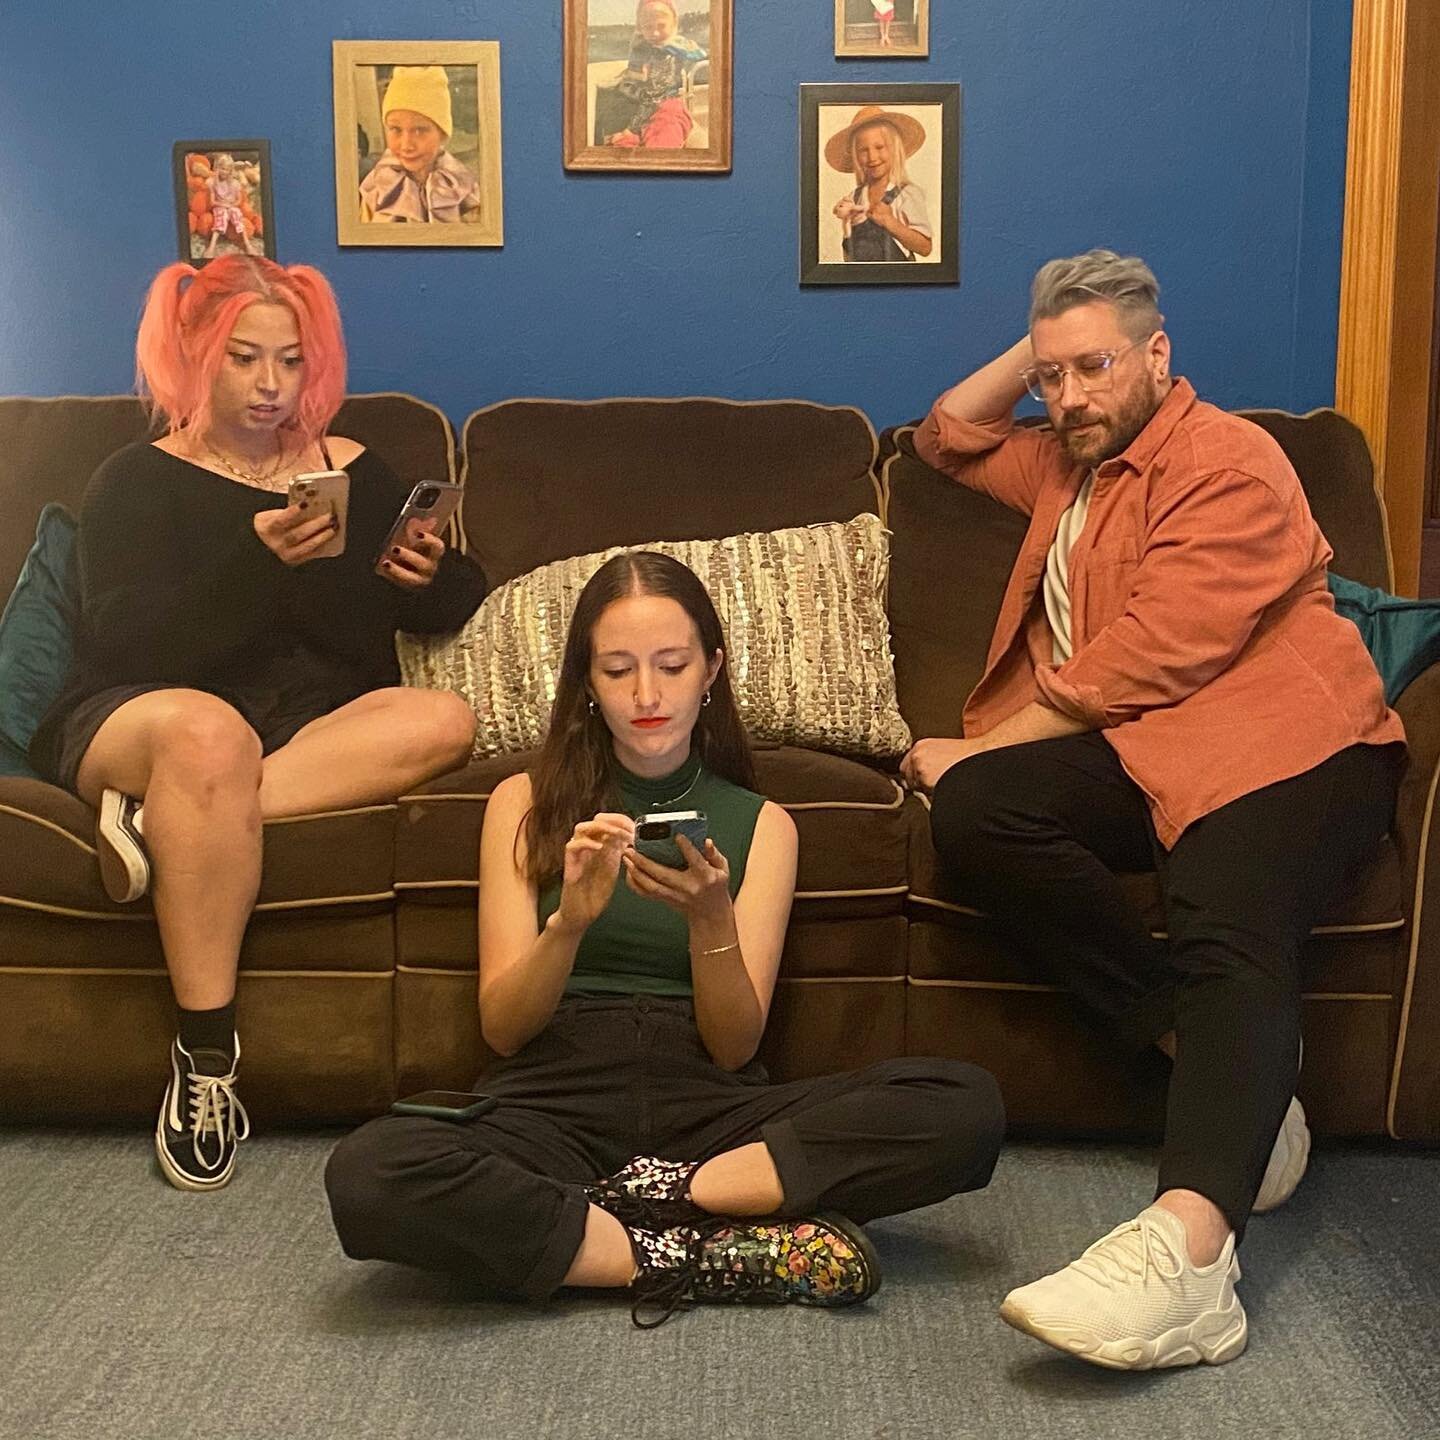 Make sure to join the Twitter party held by these 3 (plus our fearless leader, @roo_pow, and our incredible decoys) during tonight&rsquo;s episode of #UndercoverUnderage at 9/8c on @investigationdiscovery! 

Just search #UndercoverUnderage on Twitter